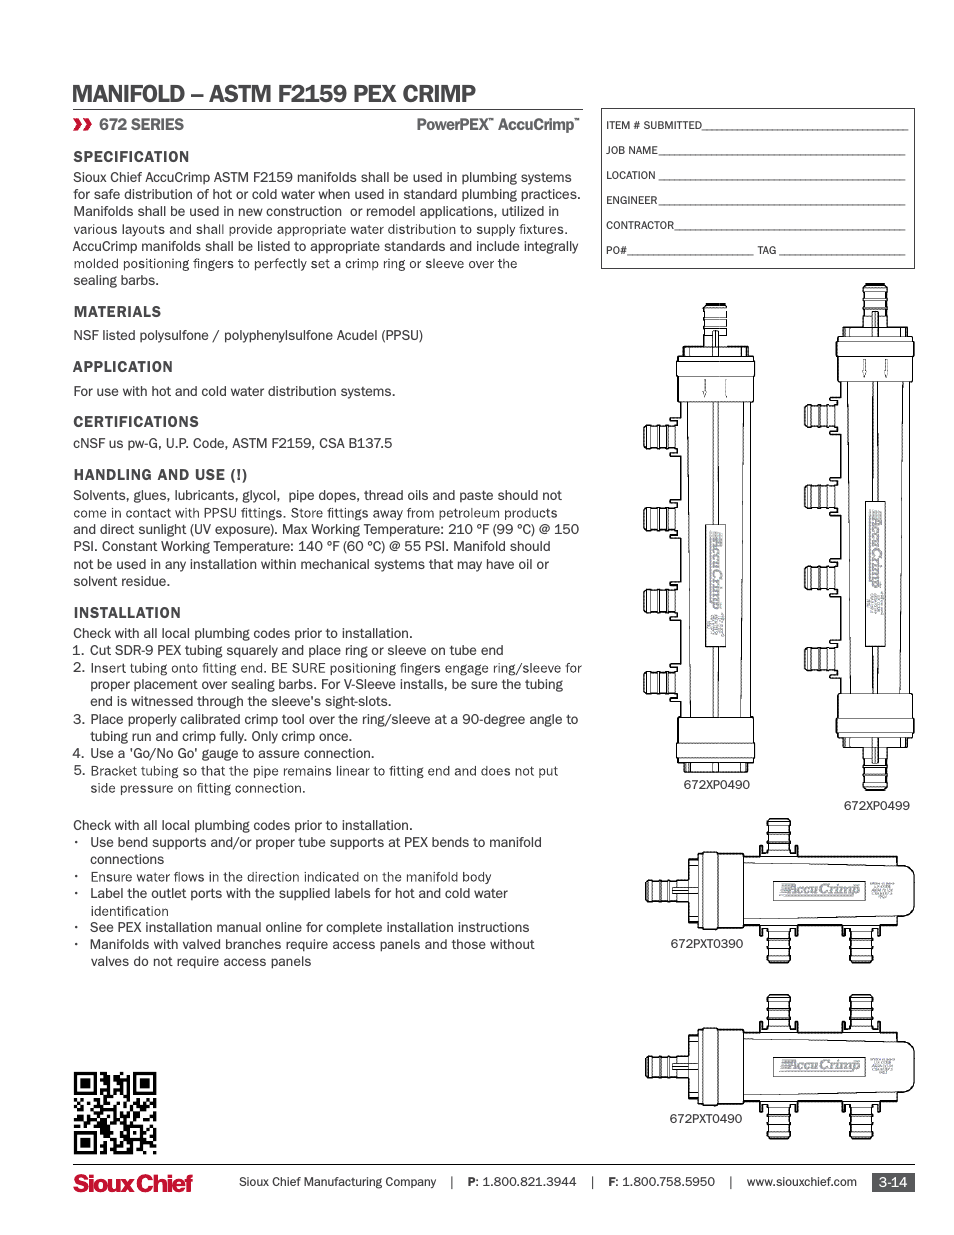 672 Series ASTM F2159 Manifolds Accucrimp